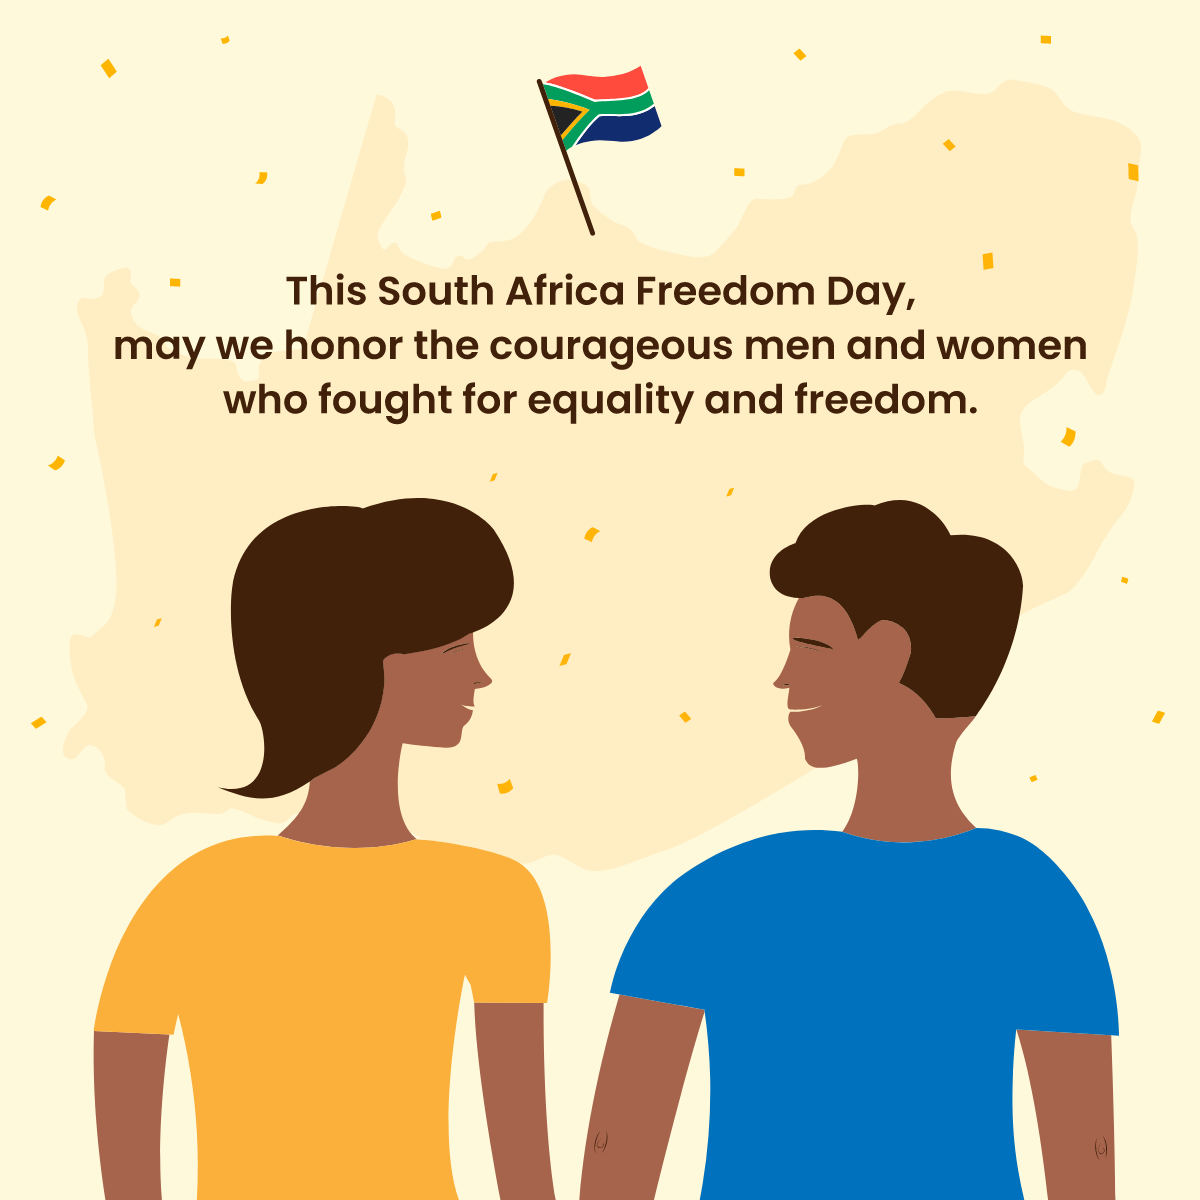 South Africa Freedom Day Linkedin Post